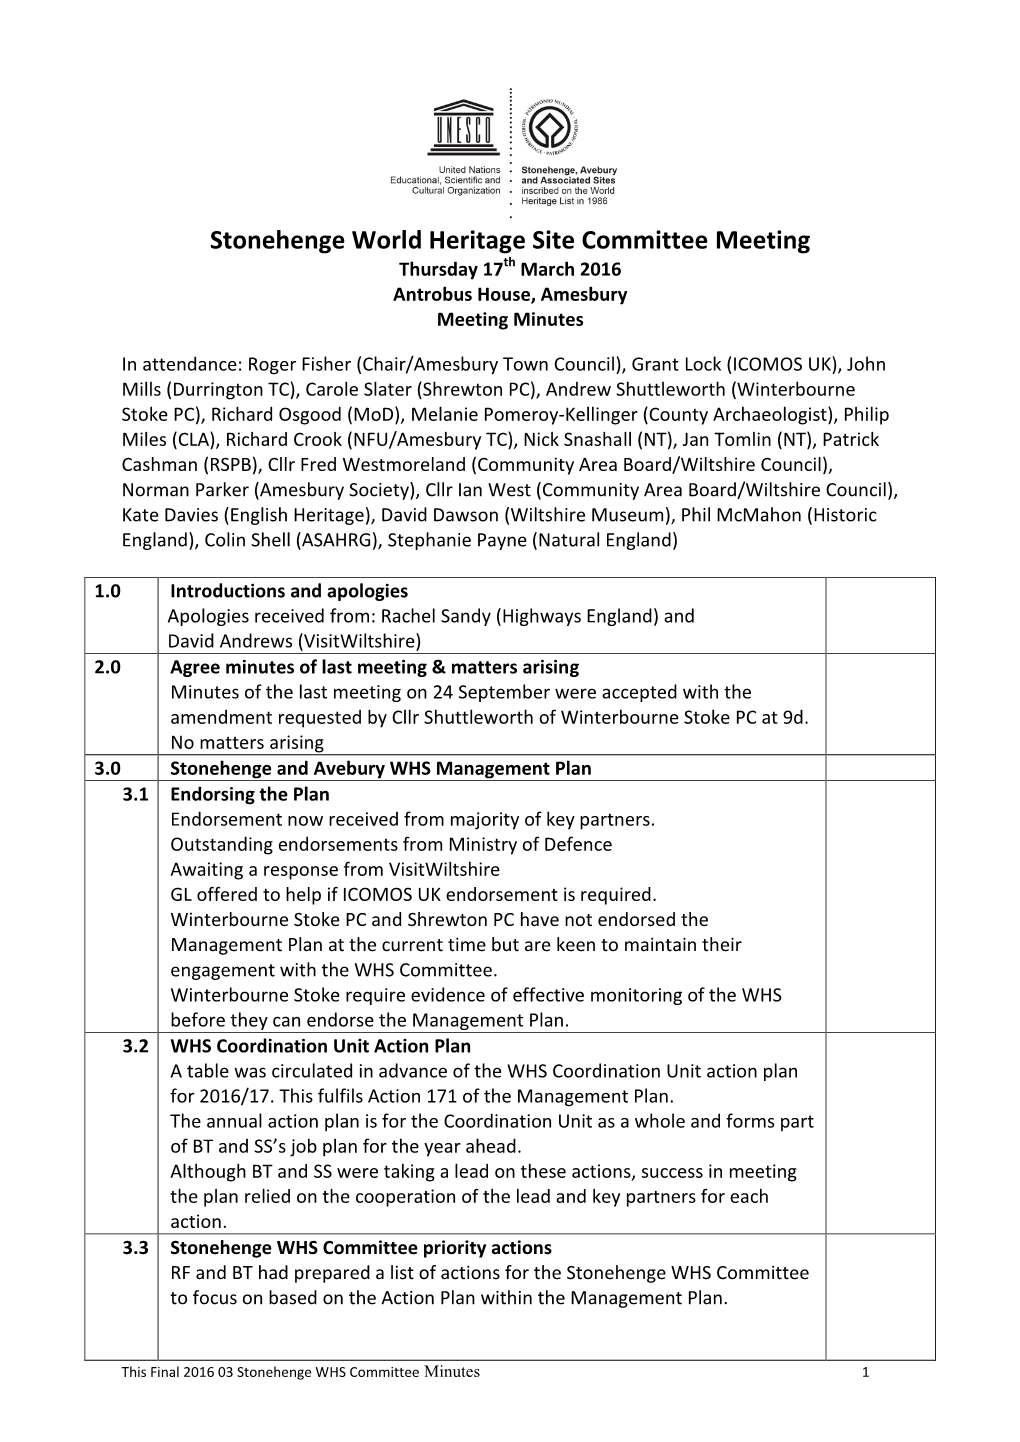 Stonehenge WHS Committee Meeting Minutes-March 2016